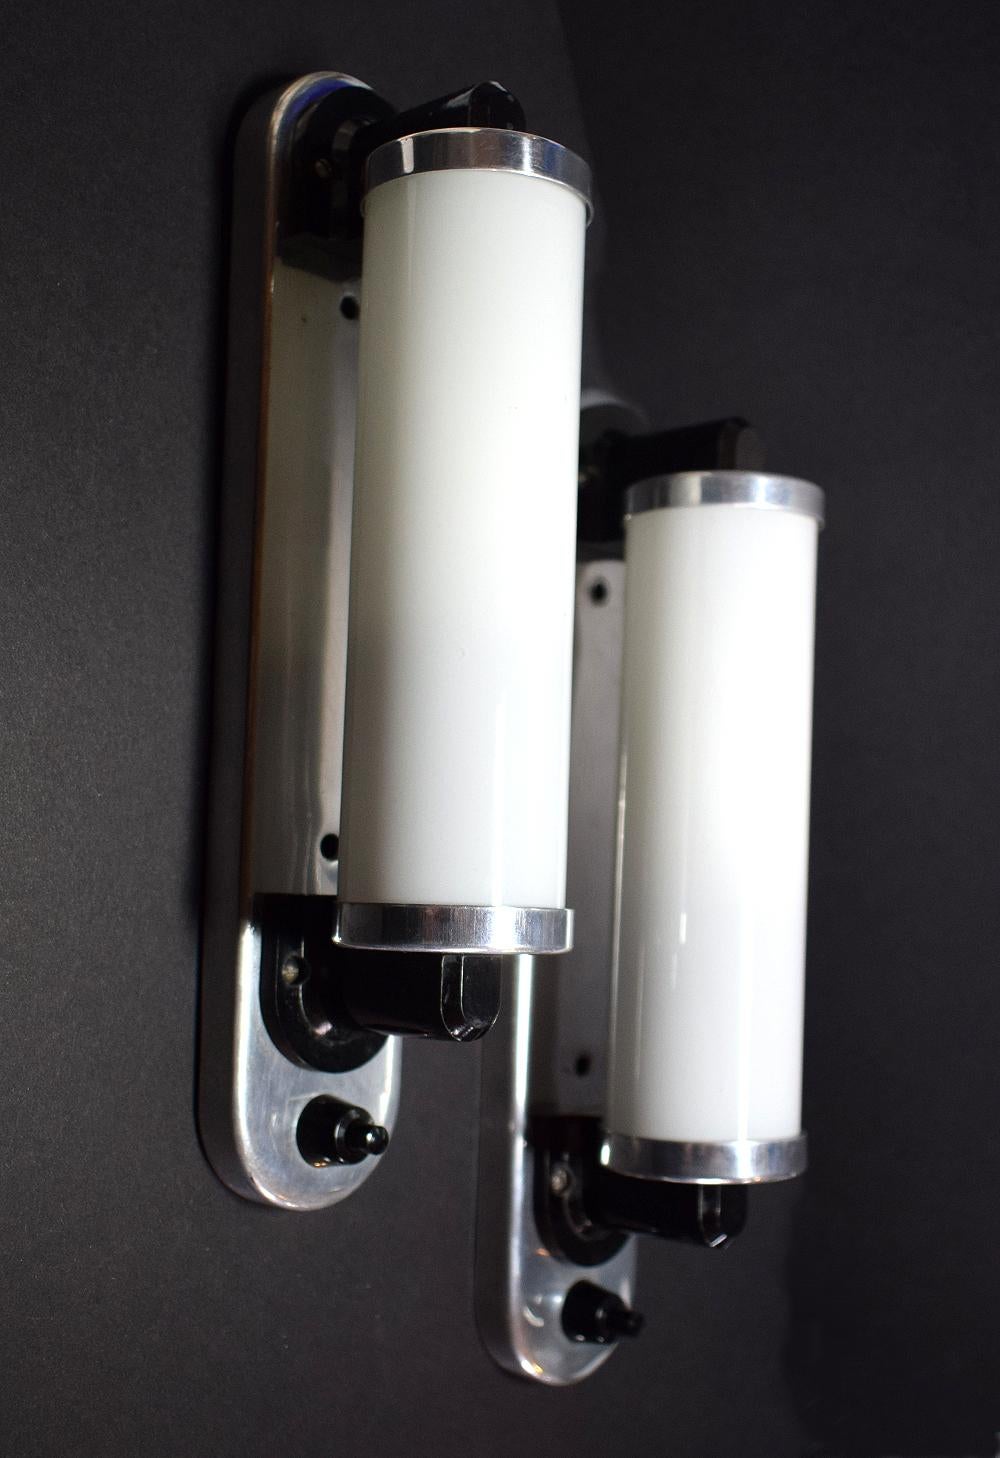 For your consideration is this small Modernist Art Deco matching pair of wall light sconces with a black bakelite switch. Opaline tubular glass in highly polished aluminium frames. Ideal for bathrooms, hallways or any where that needs framing with